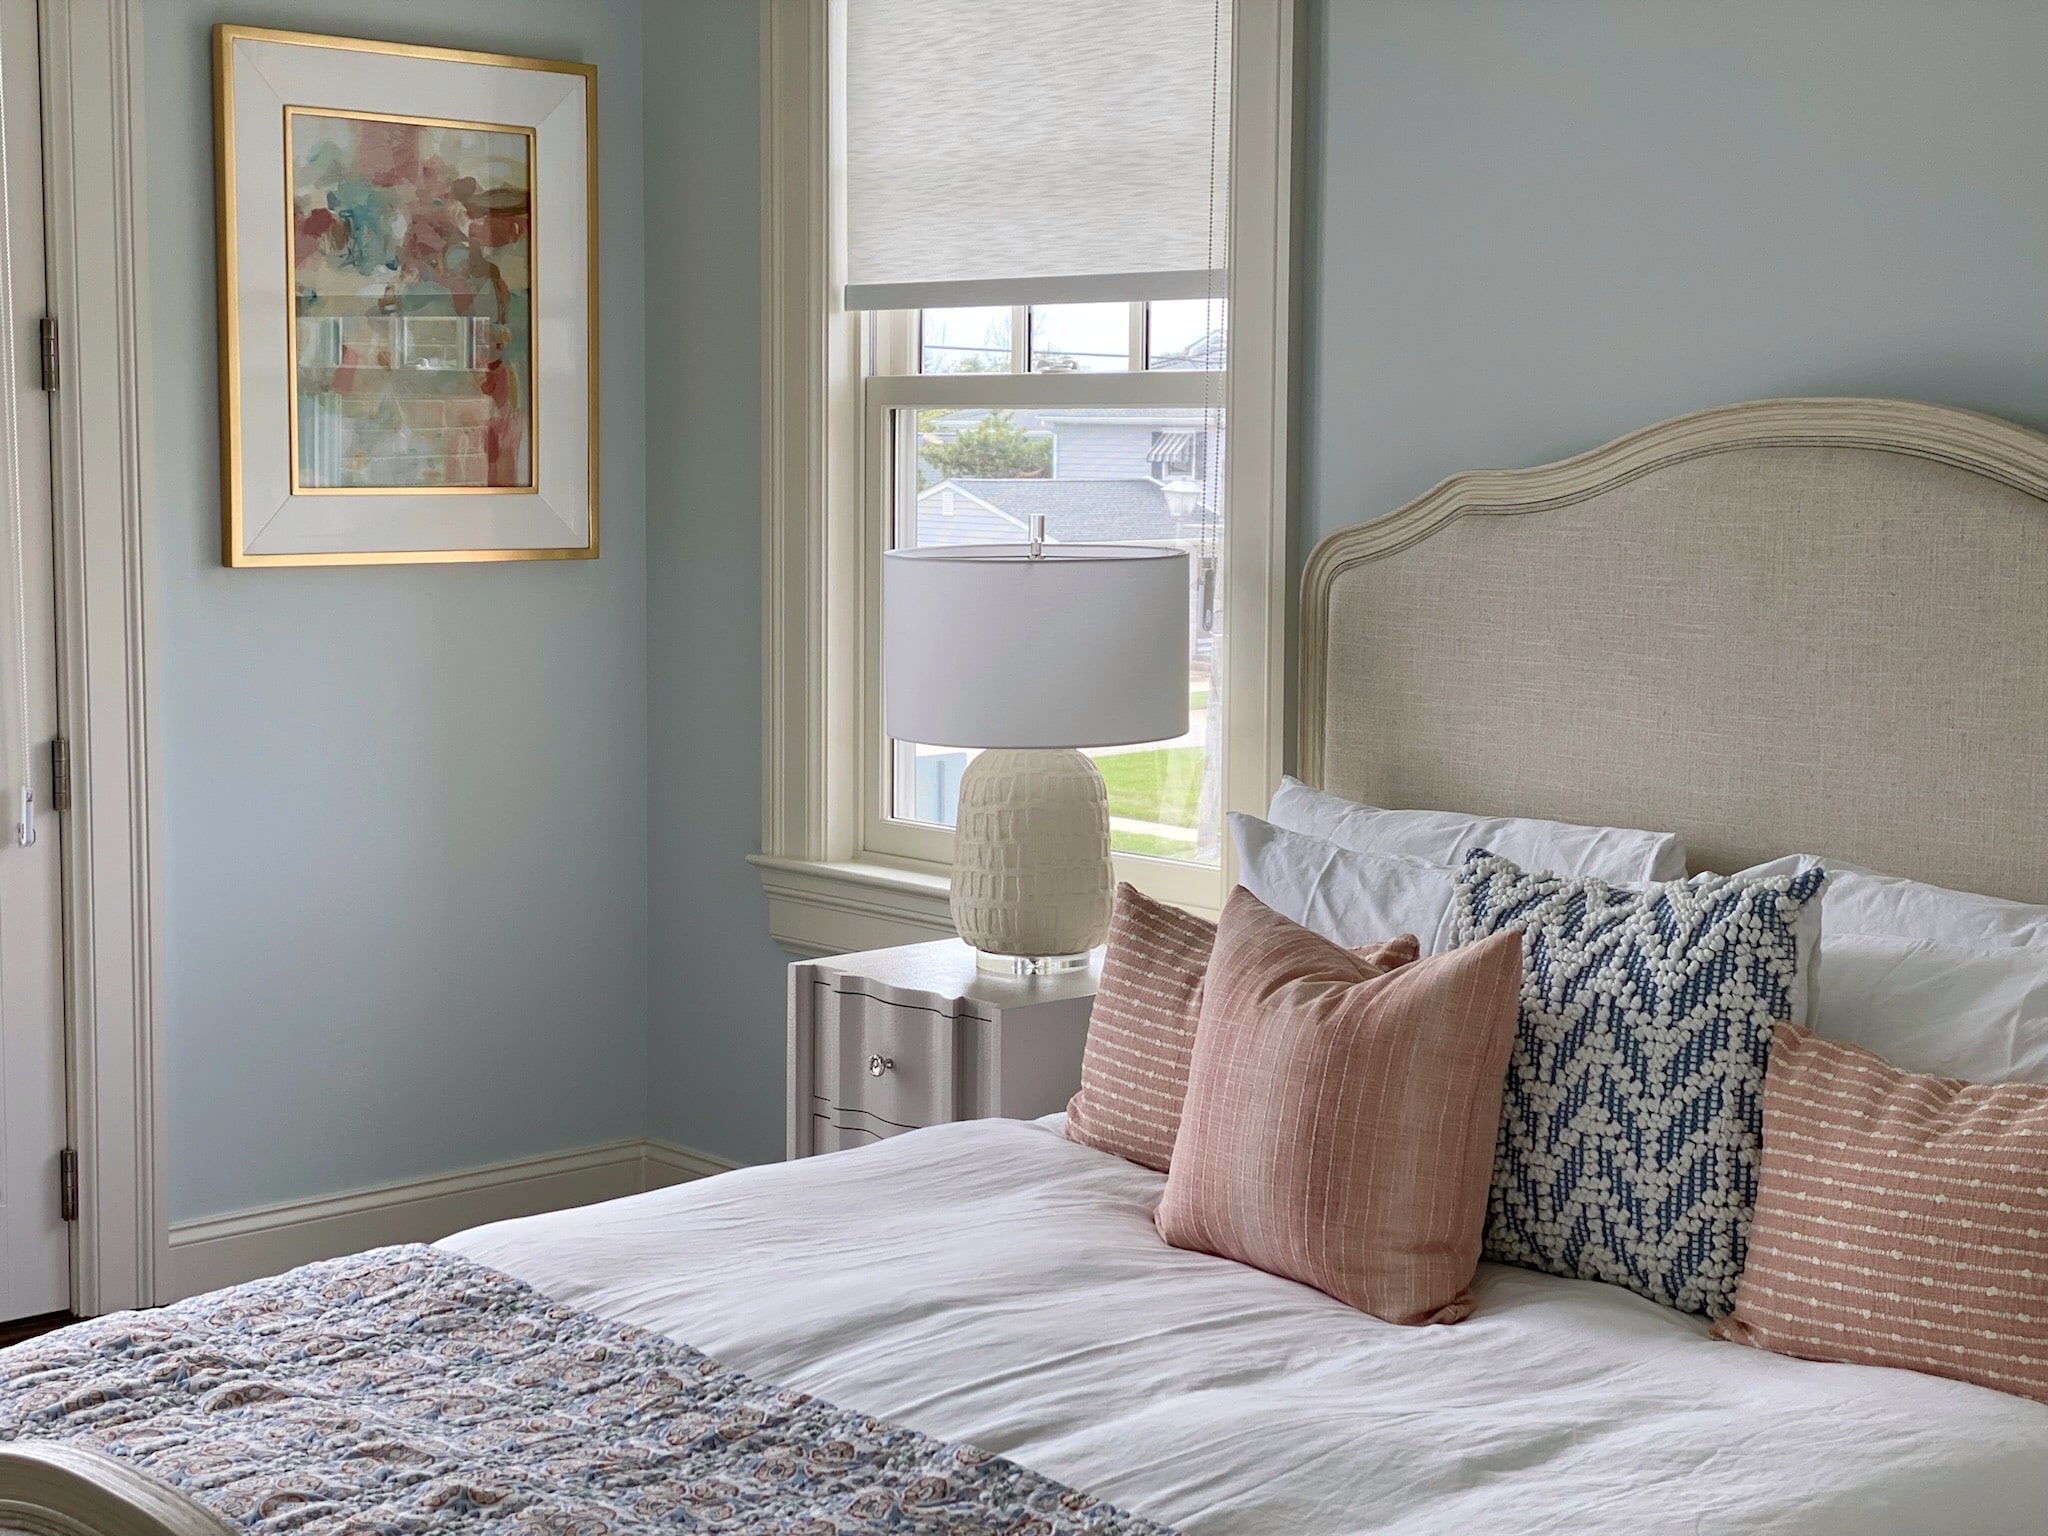 An interior design featuring a bed in a bedroom with blue walls.